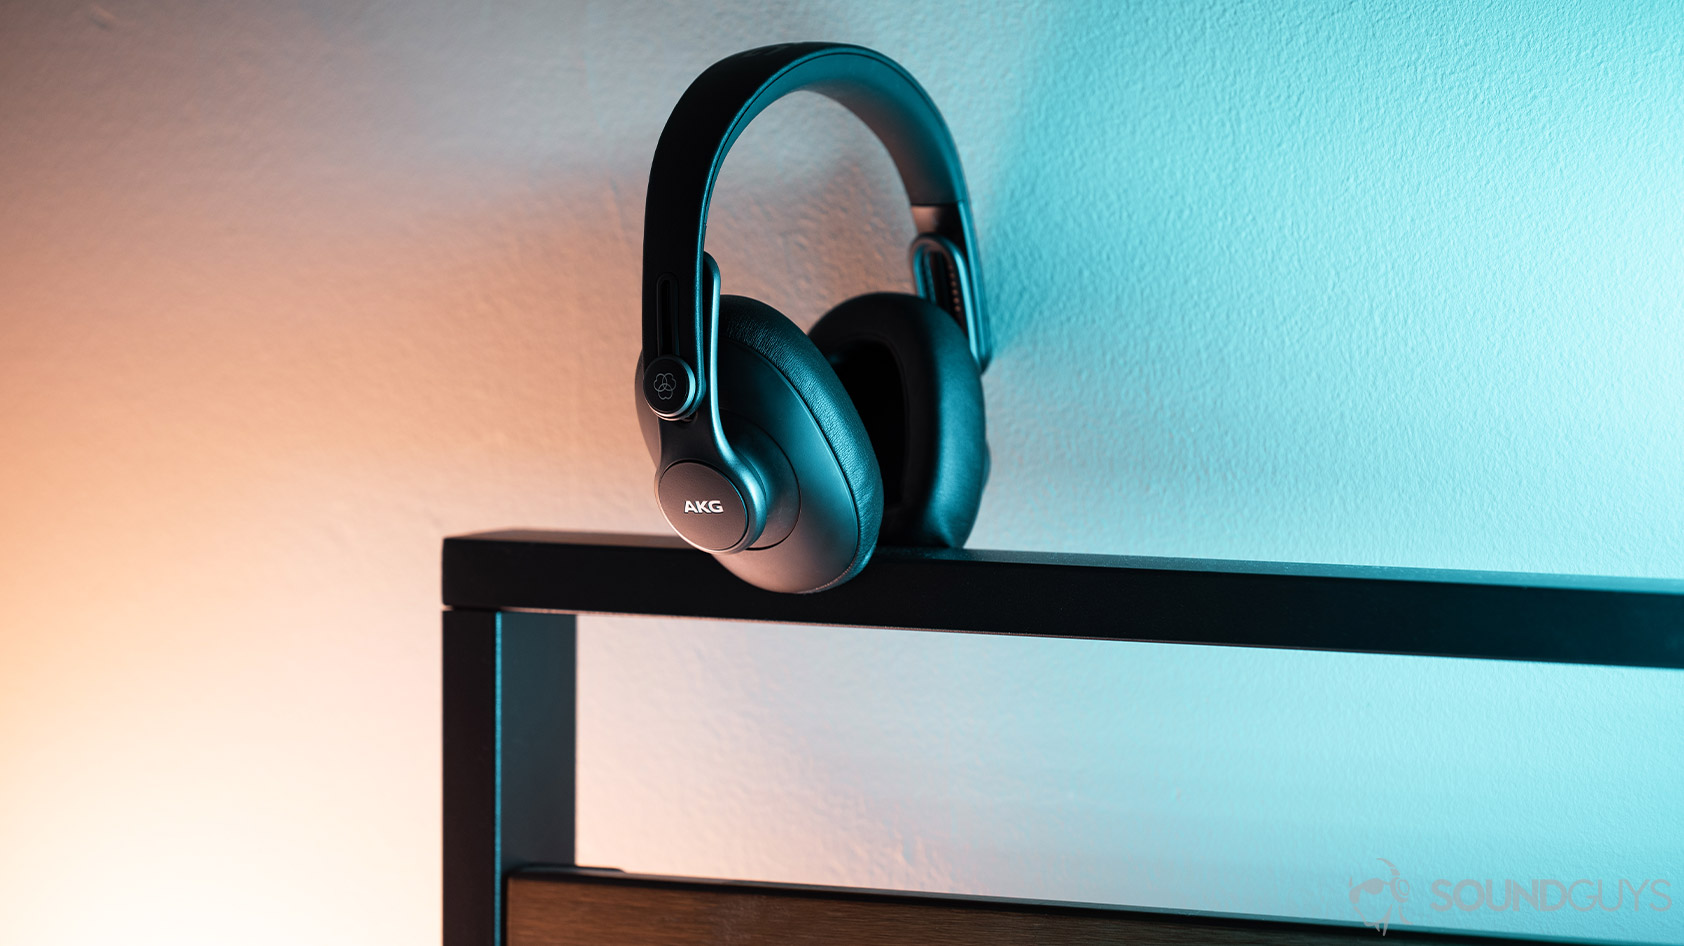 The AKG K371 wired over-ear headphones on an iron bedrame lit by blue and orange lights.